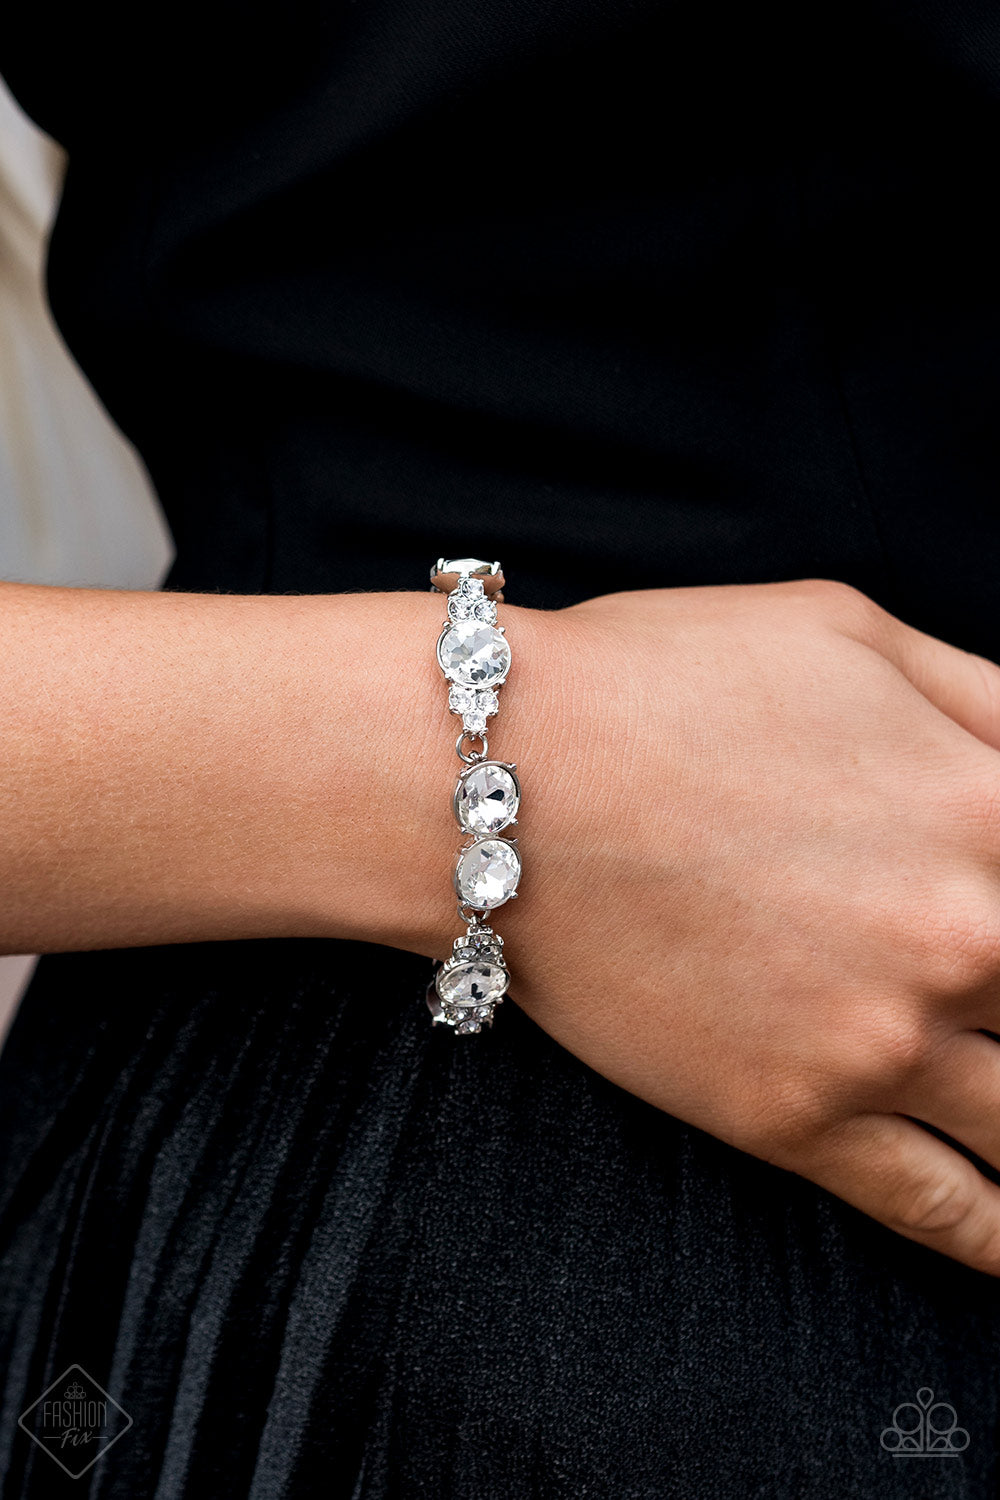 CARE TO MAKE A WAGER? - WHITE RHINESTONES BRACELET